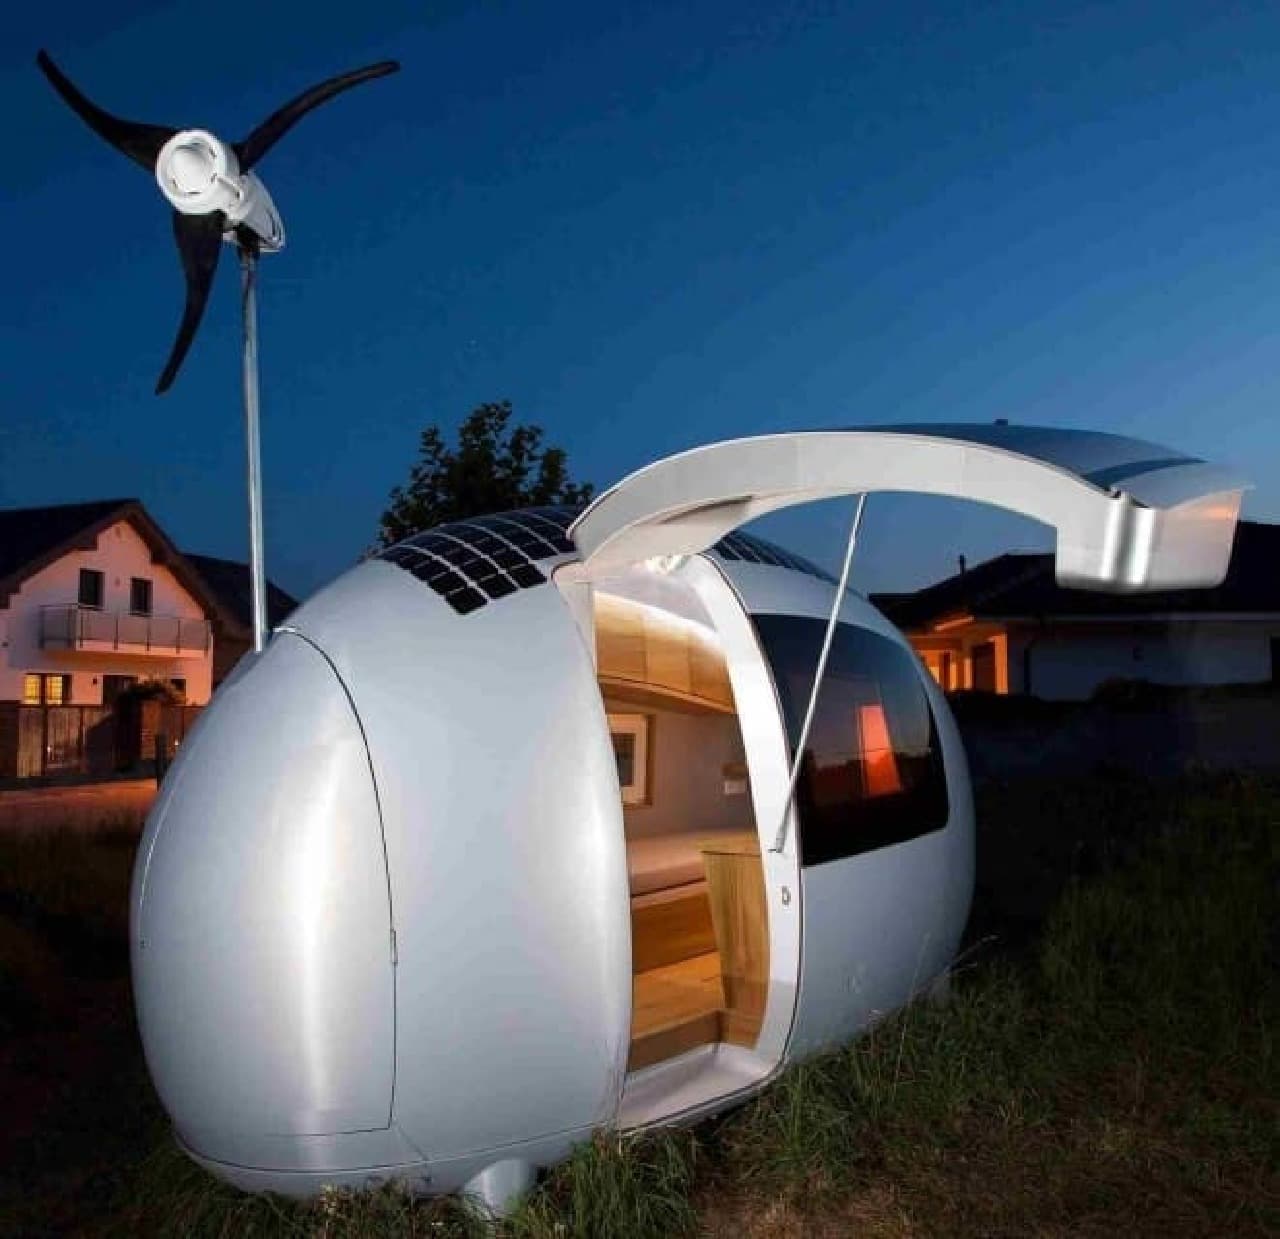 "Propeller" that effectively uses the power of the wind